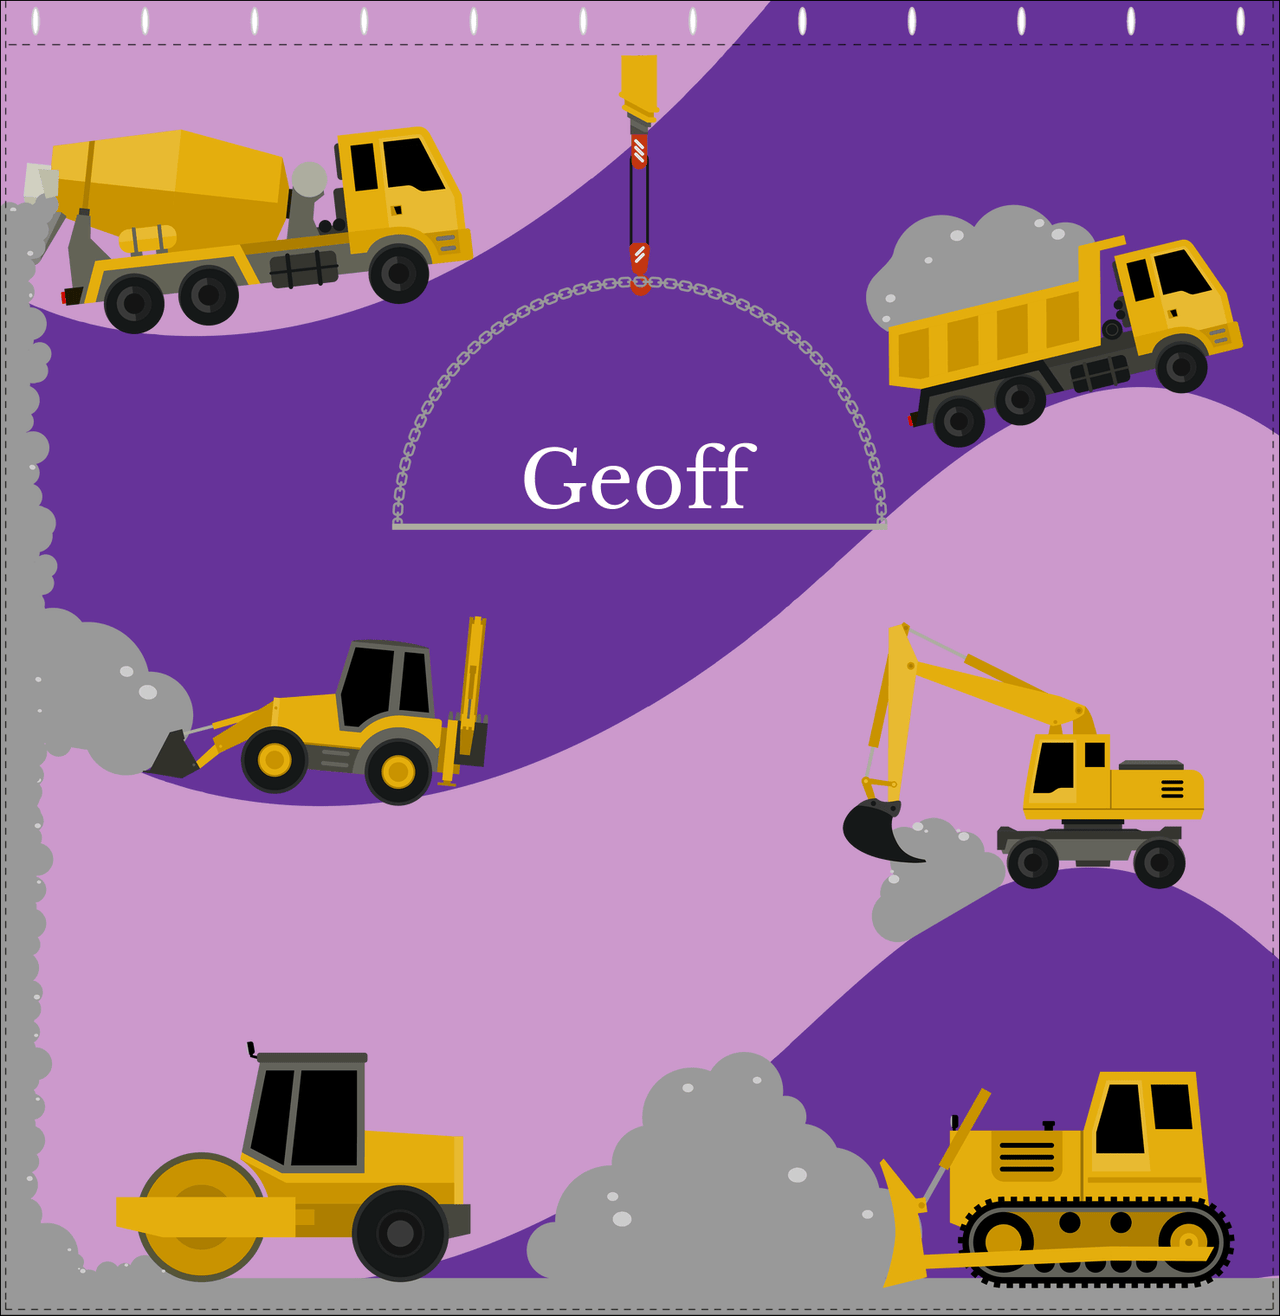 Personalized Construction Truck Shower Curtain VII - All Trucks - Purple Background - Decorate View